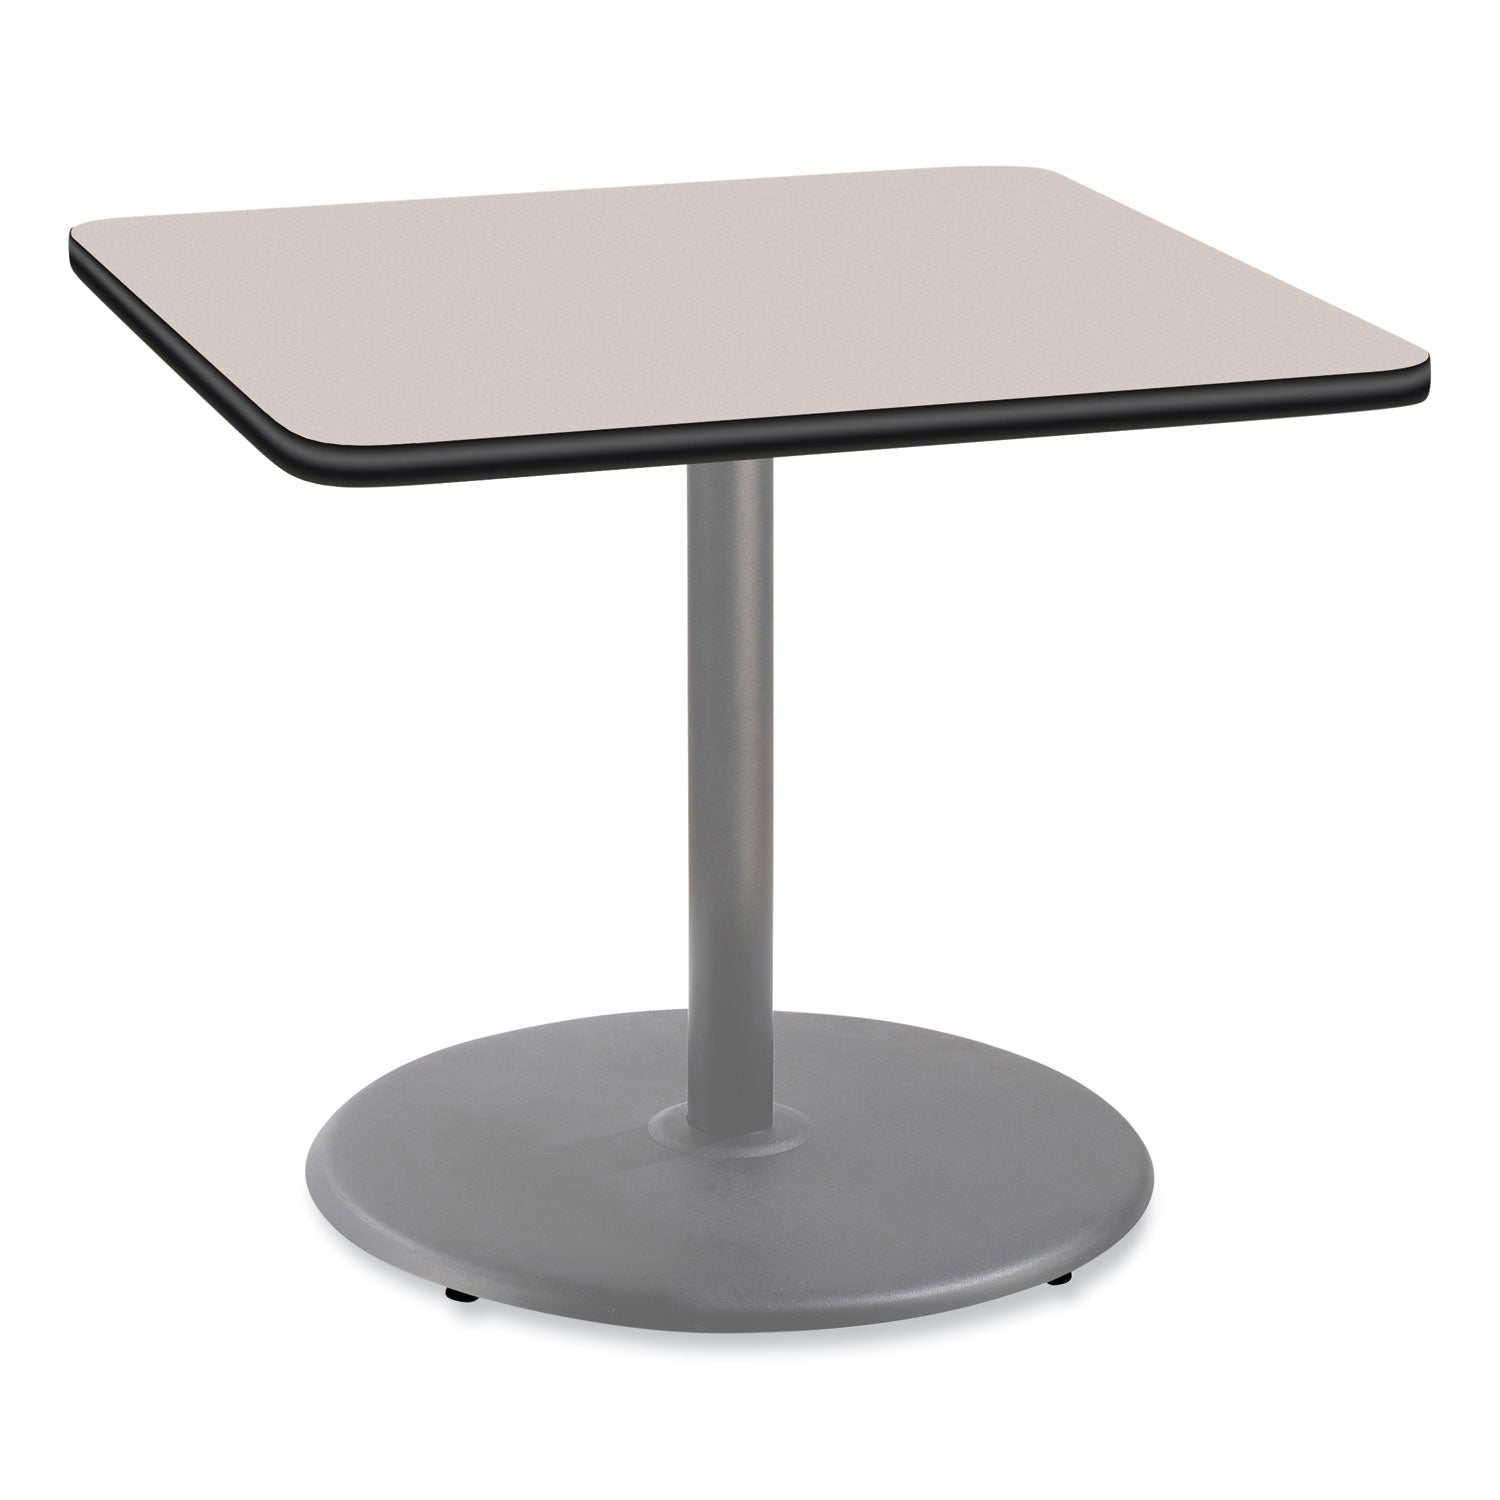 cafe-table-36w-x-36d-x-30h-square-top-round-base-gray-nebula-top-gray-base-ships-in-7-10-business-days_npscg33636rd1gy - 1